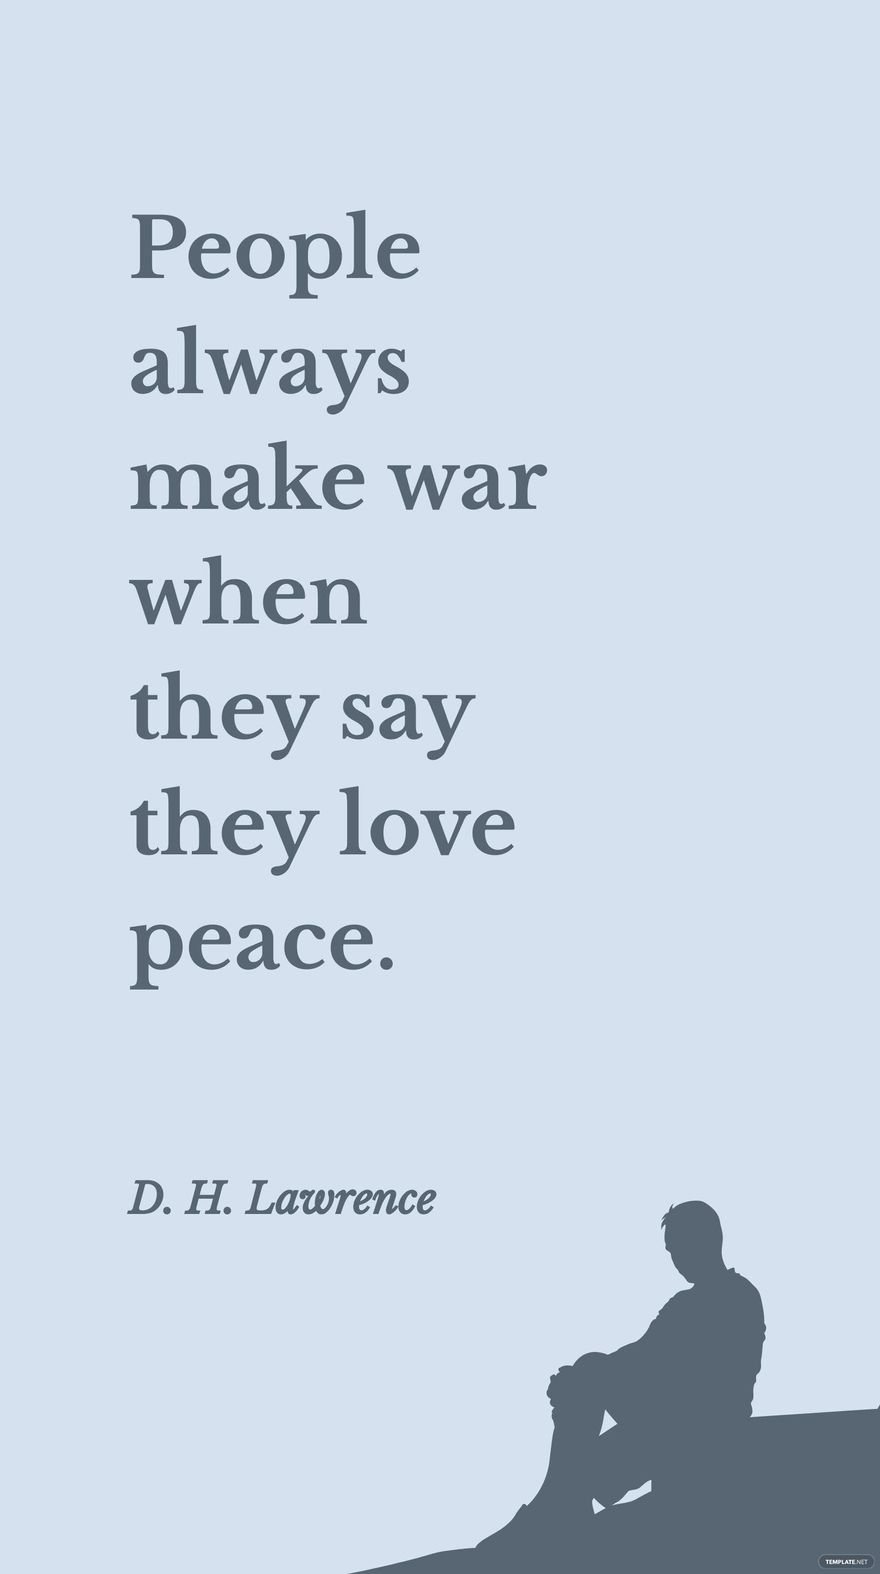 D. H. Lawrence - People always make war when they say they love peace.